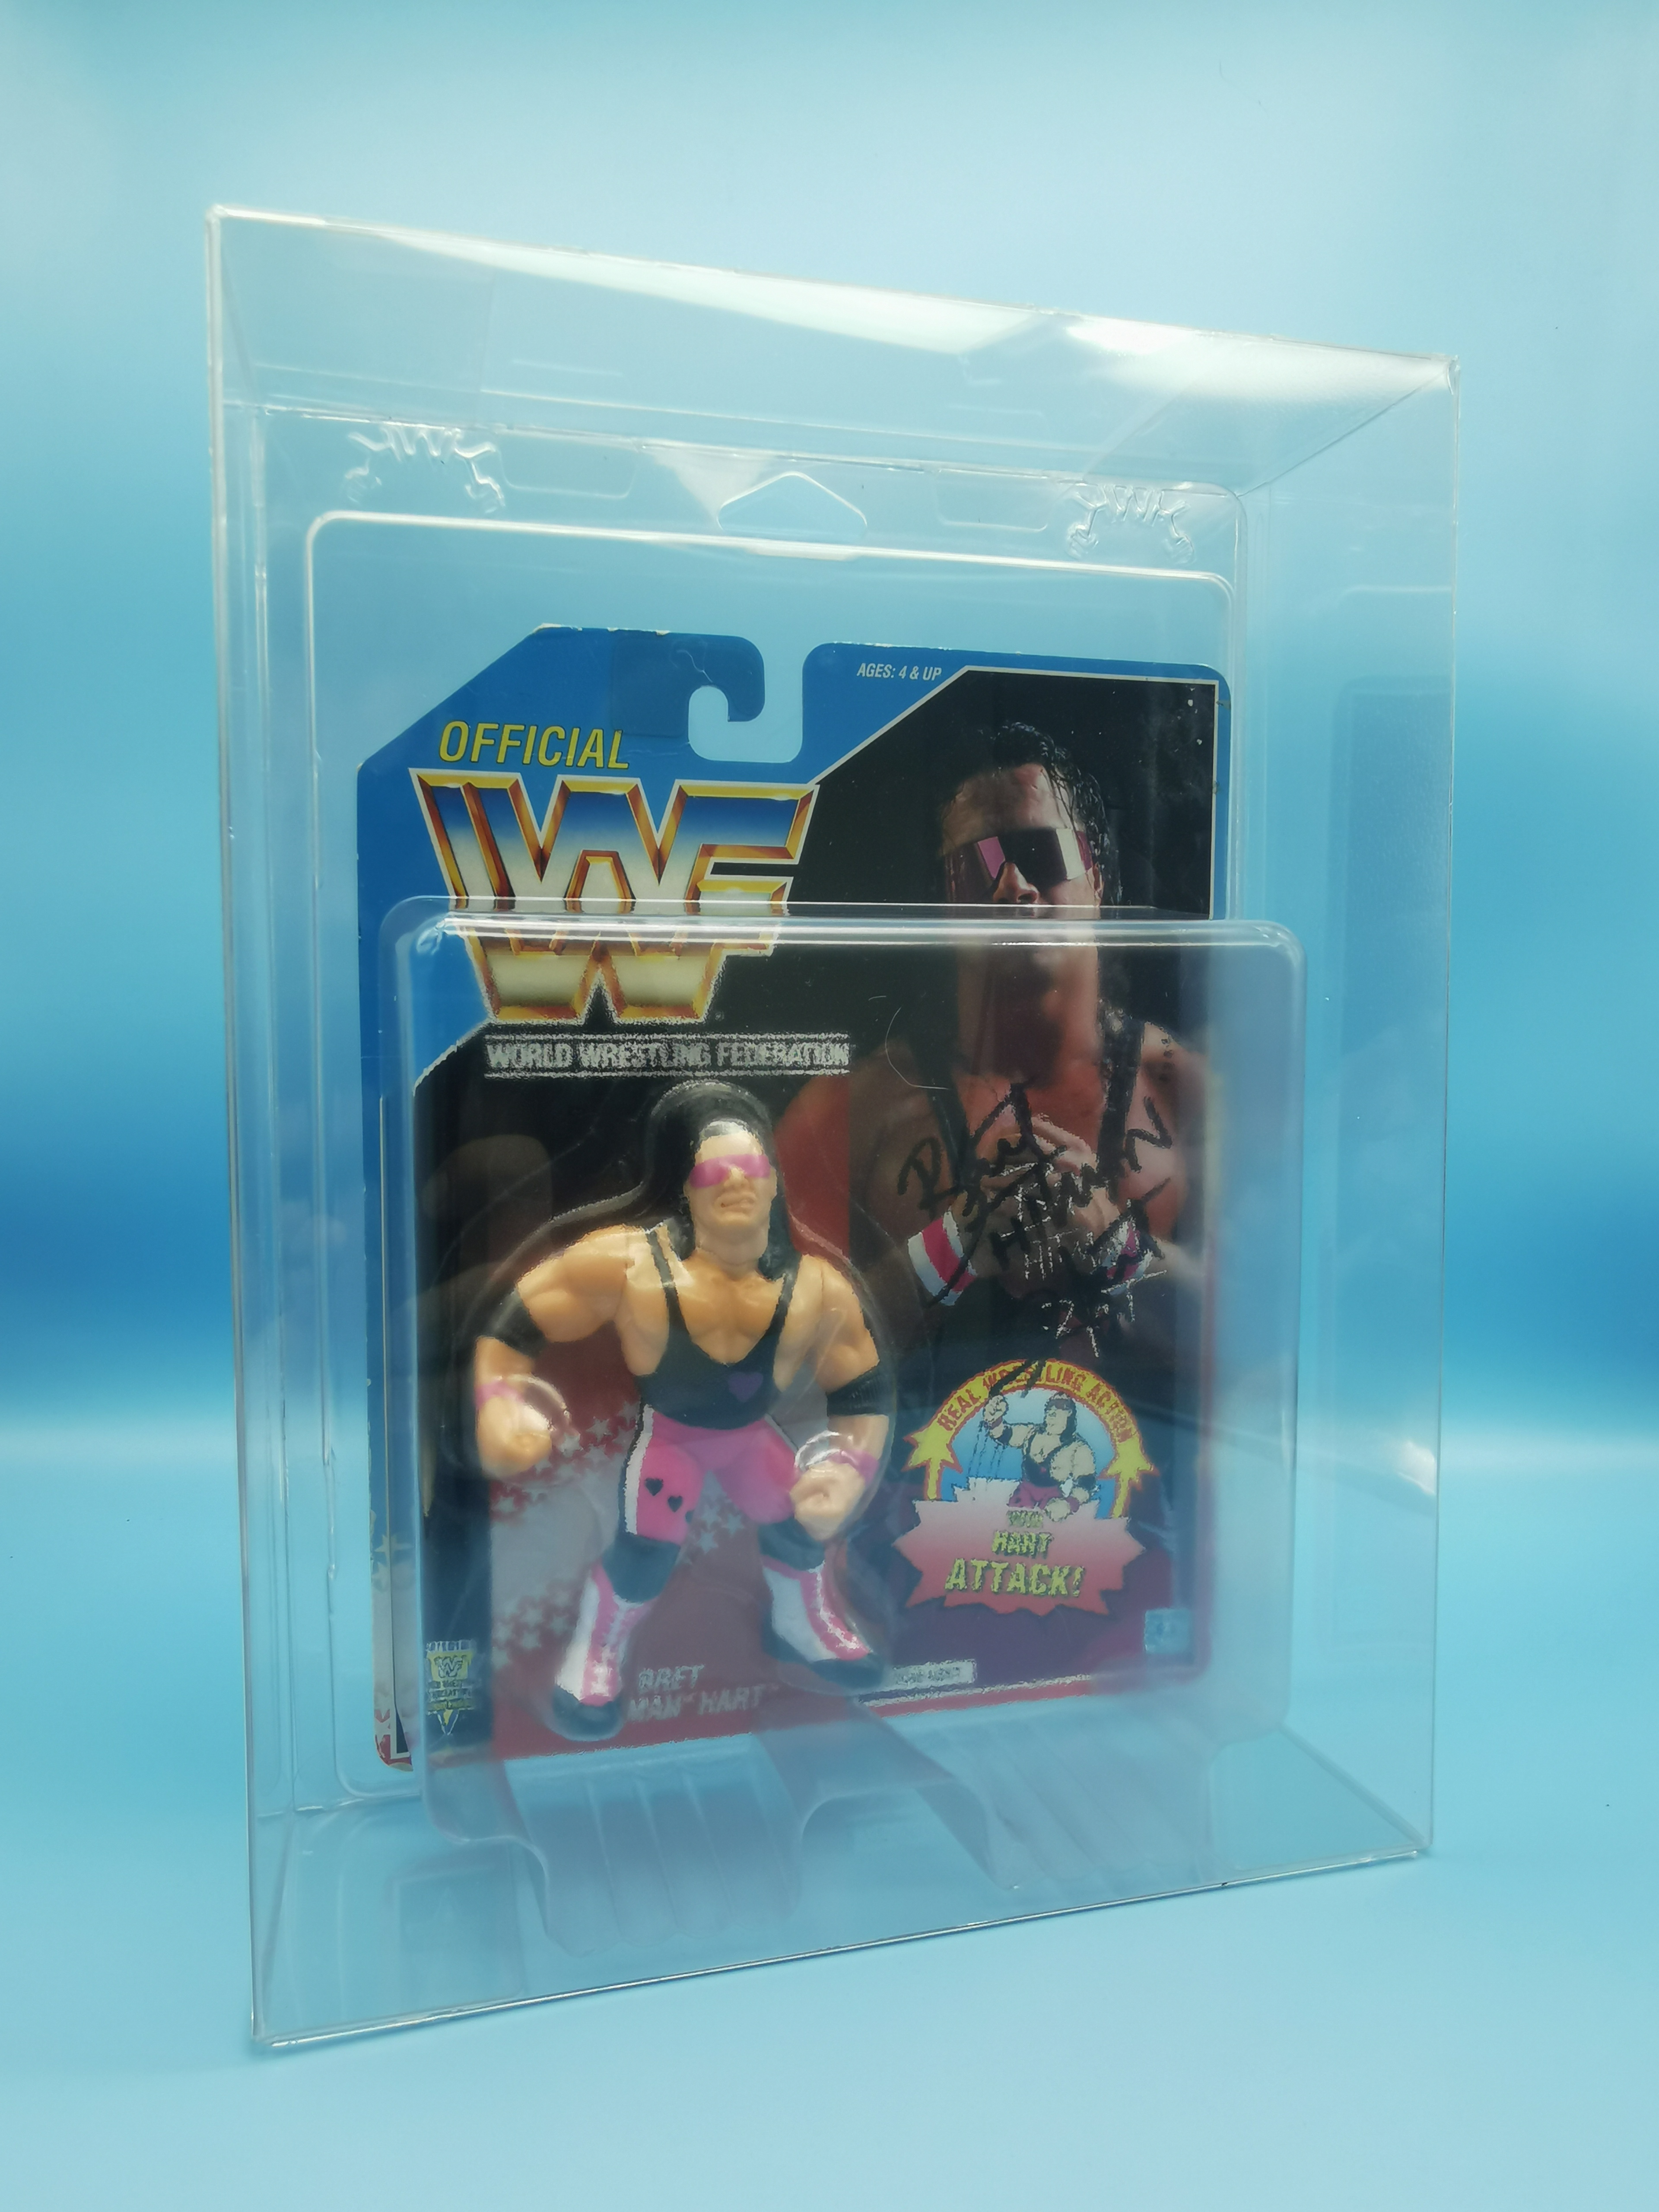 ShopAEW Hook 1 of 3K Figure Now Available – Wrestling Figure News